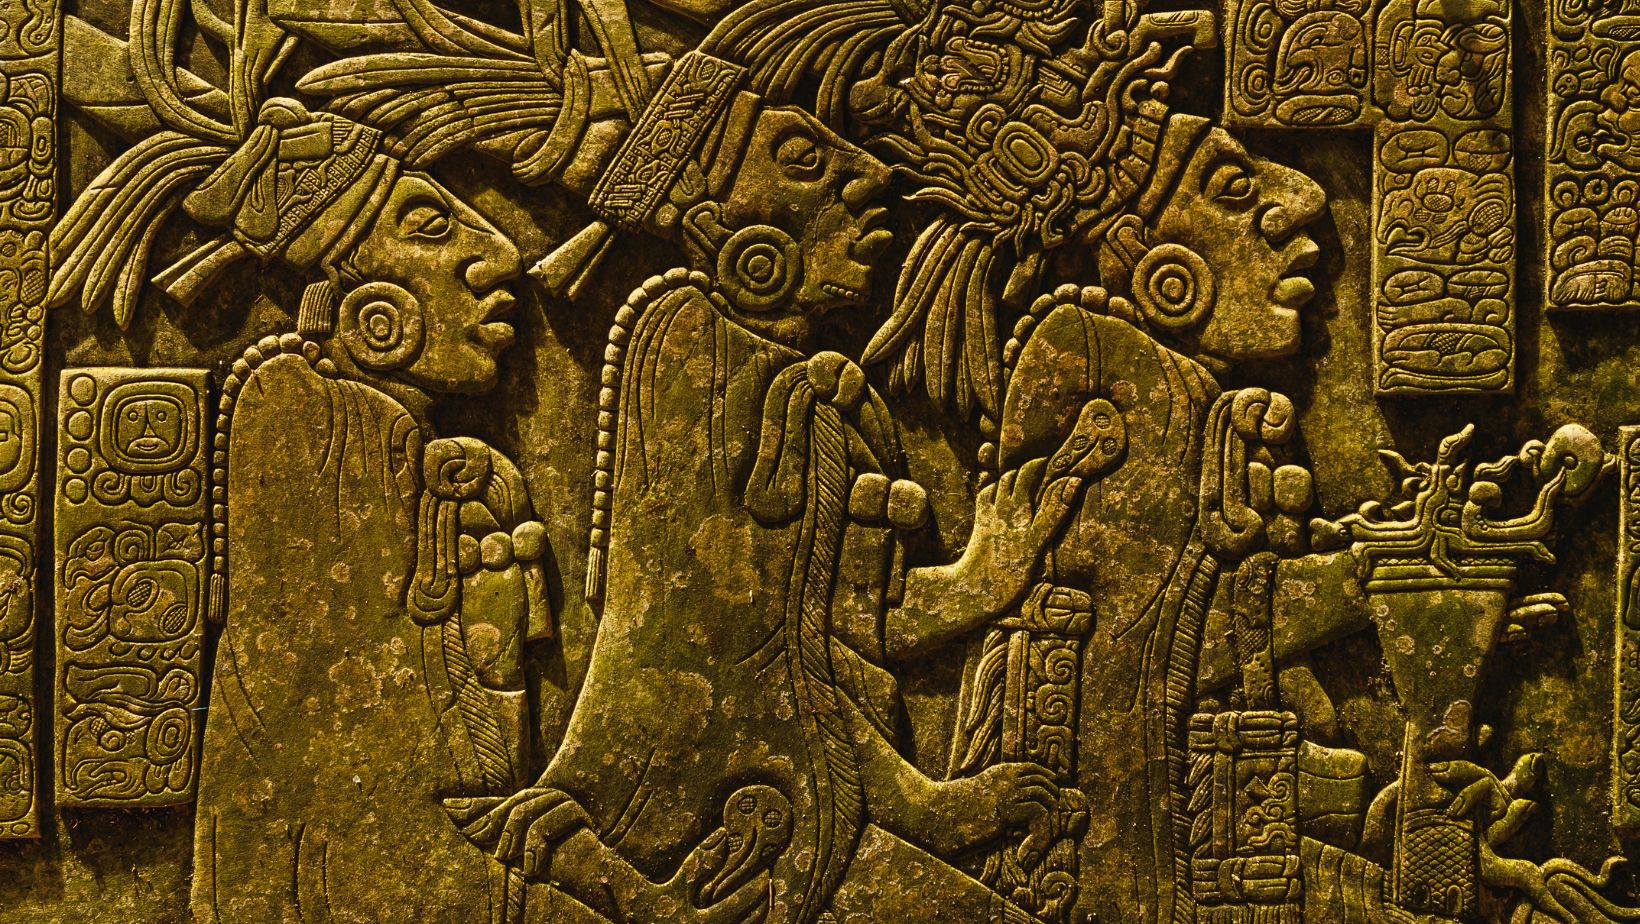 Why Did The Mayans Engage in Human Sacrifice?